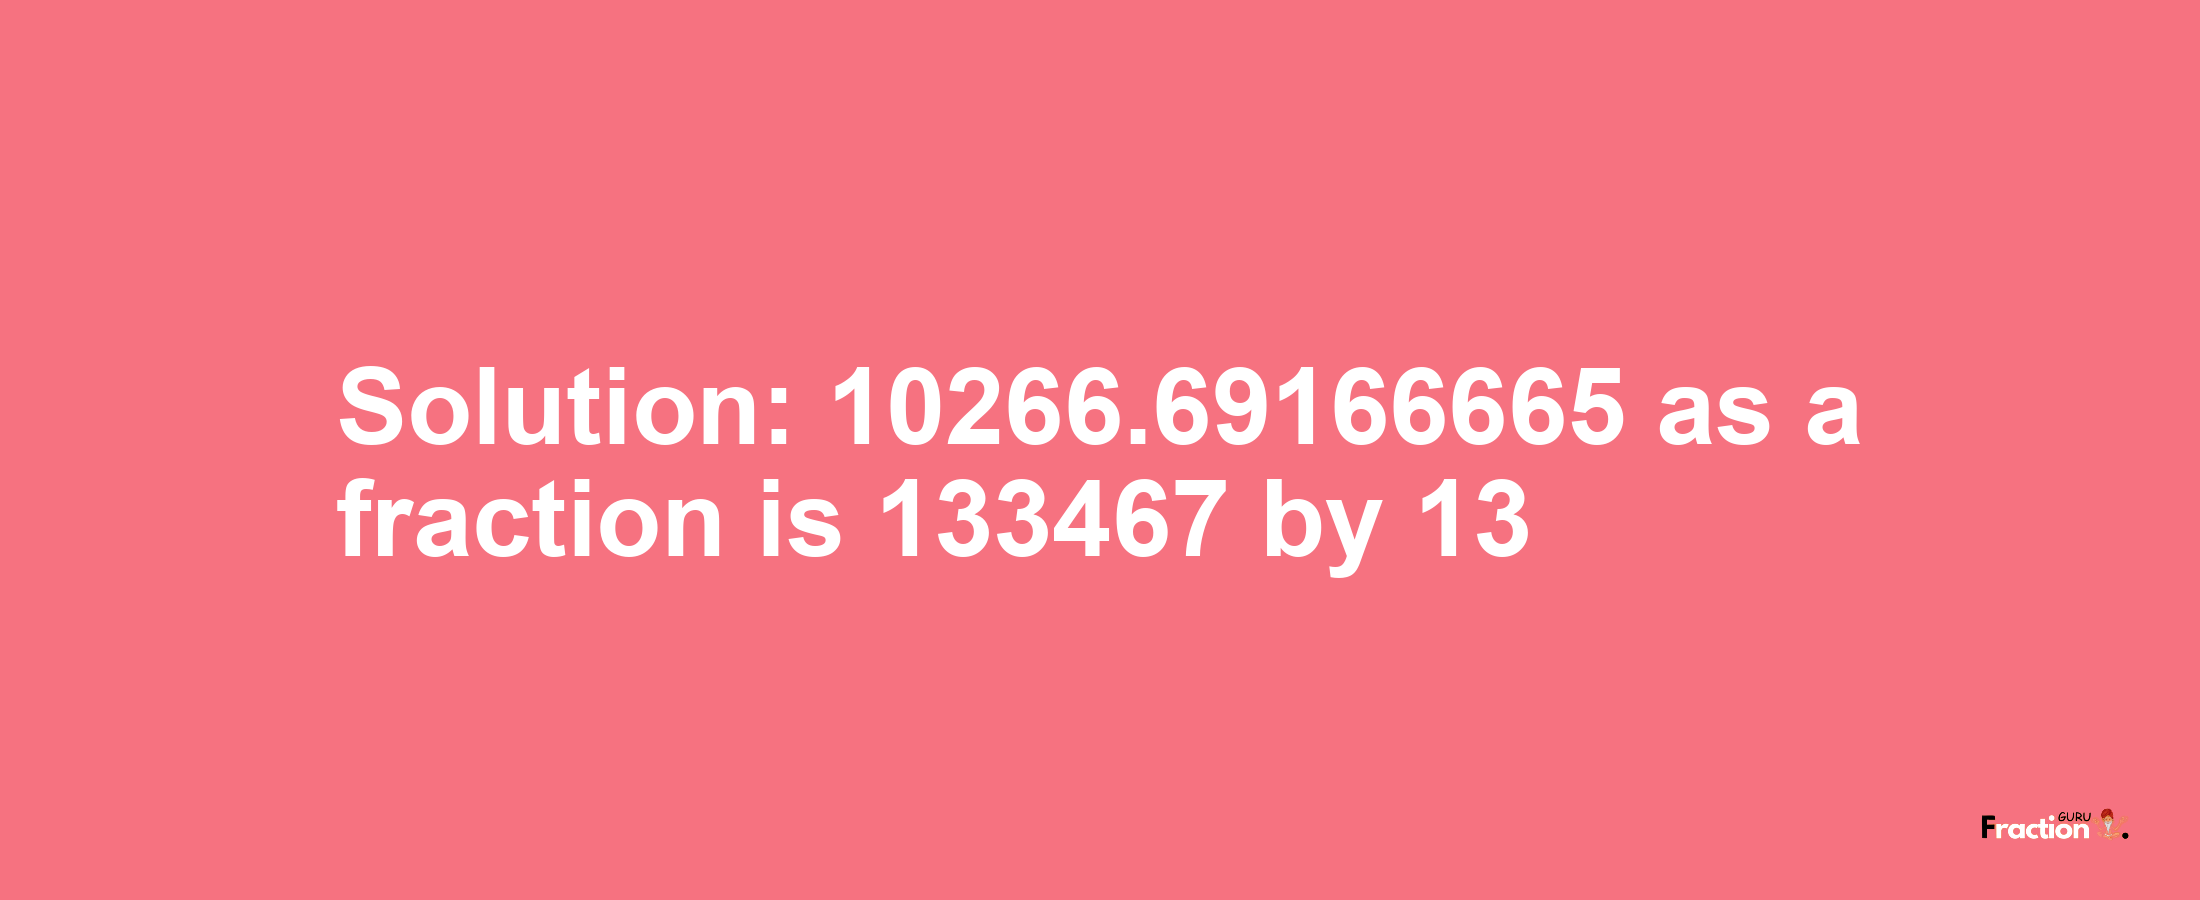 Solution:10266.69166665 as a fraction is 133467/13